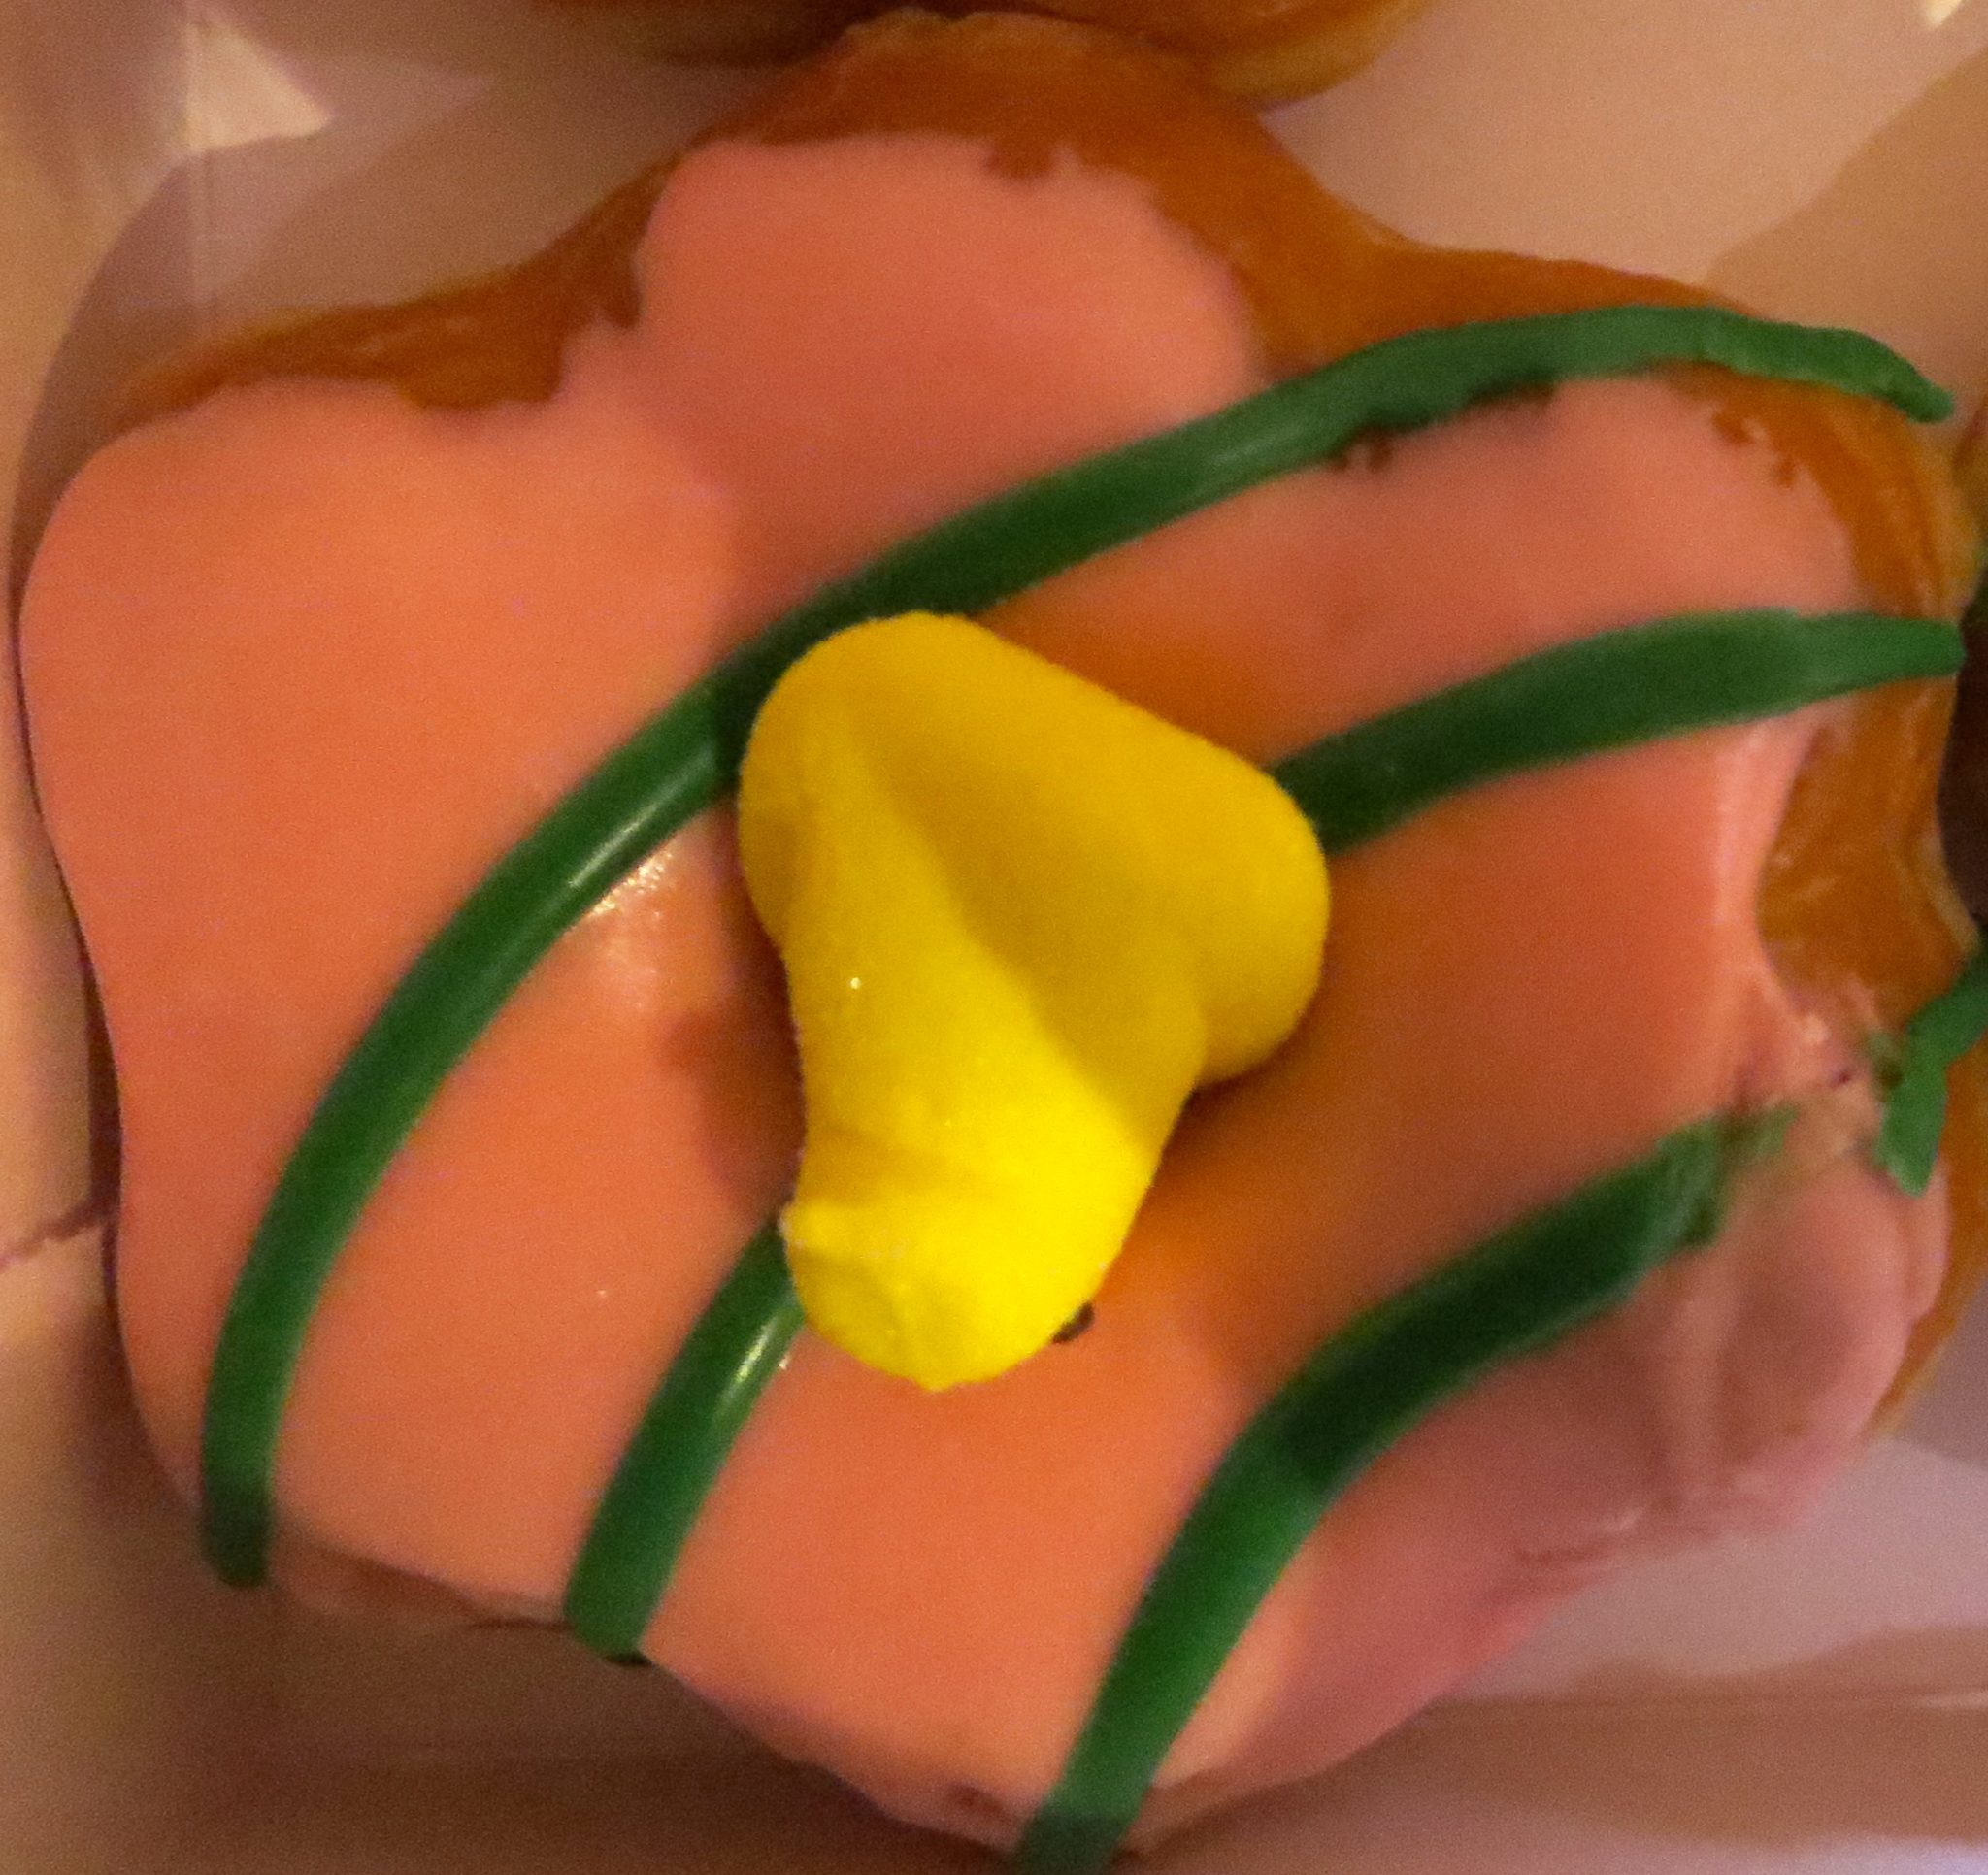 What the Peep's Donut Should Look Like.